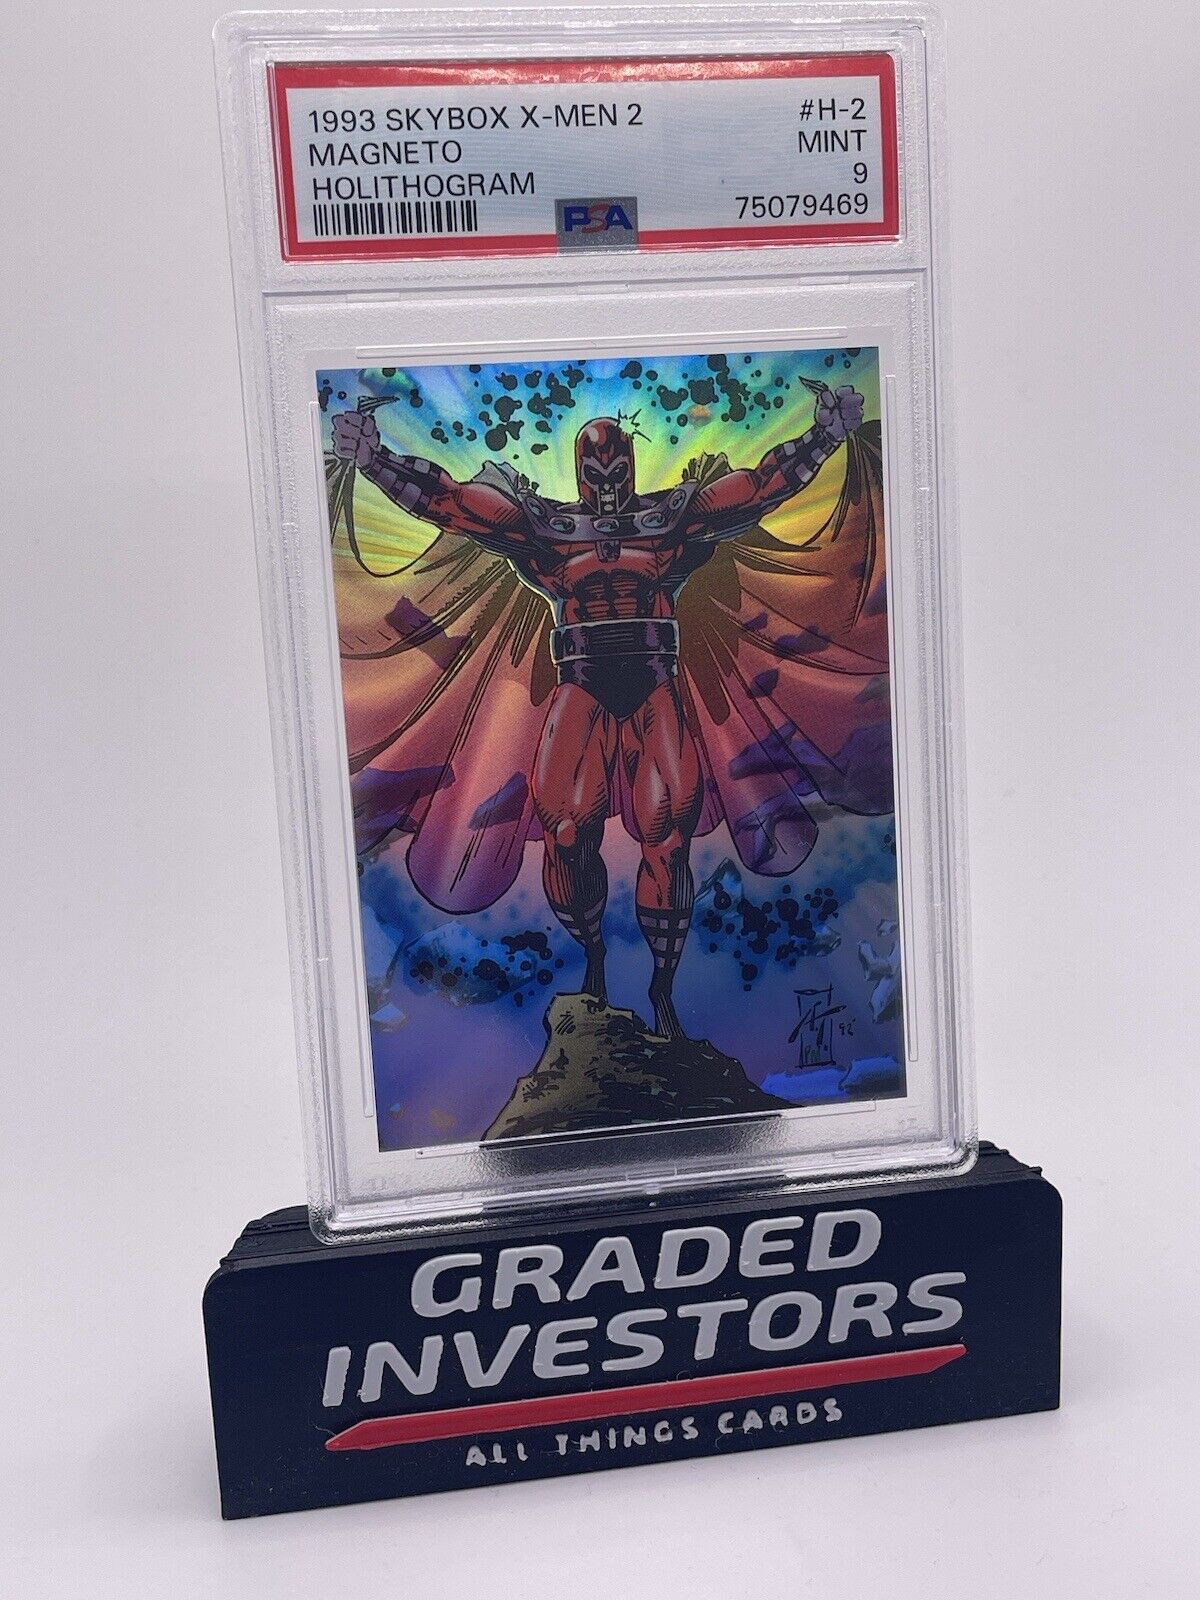 1993 X-Men 2 H-2 Magneto Holithogram PSA 9 MINT Skybox Series 2 Great Looking